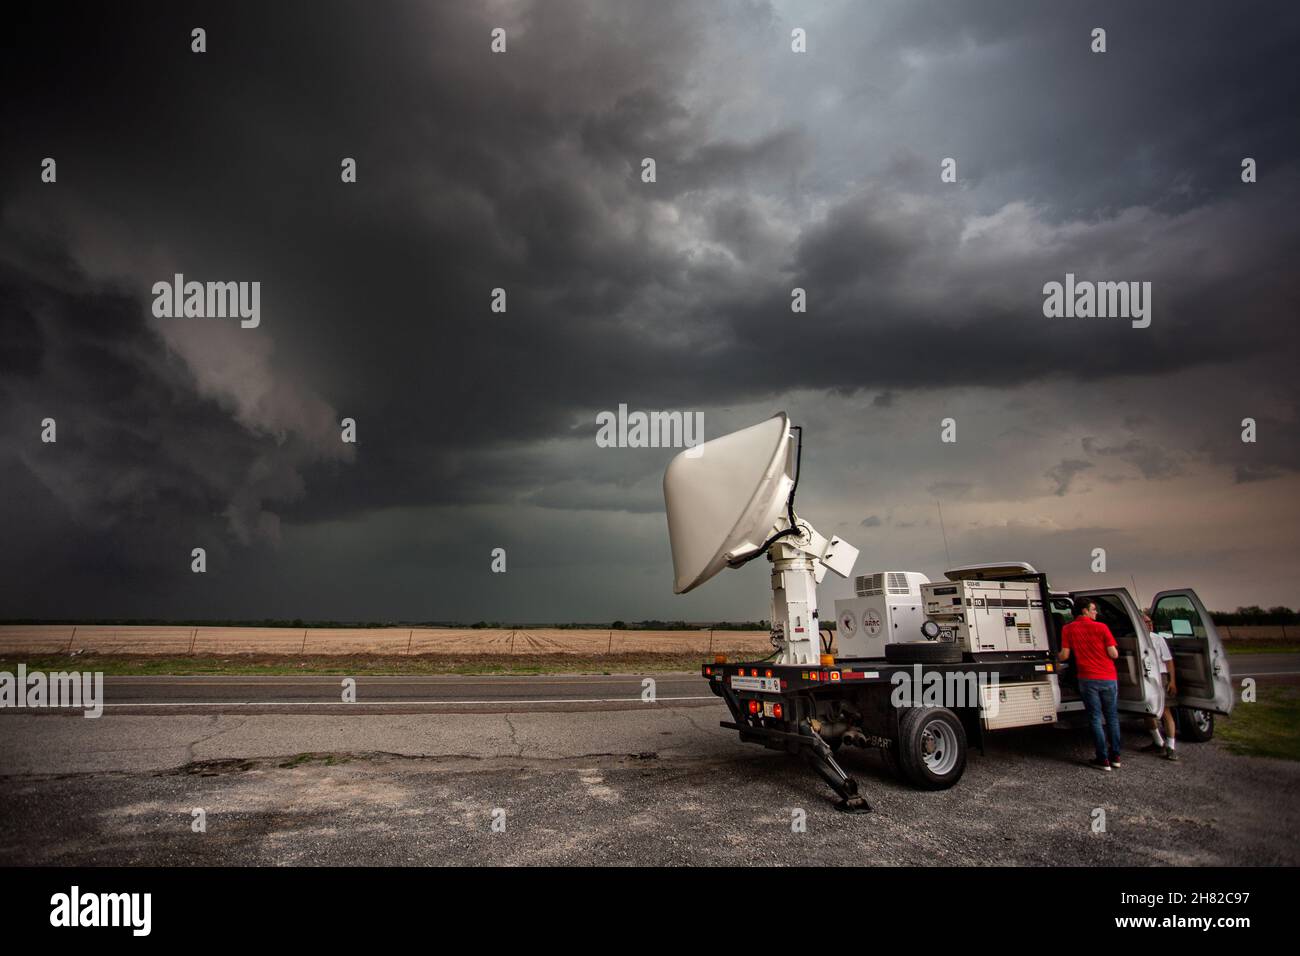 Researchers from the University of Oklahoma scan a supercell storm with a mobile radar unit near Mountain View, Oklahoma, May 2, 2018. Stock Photo